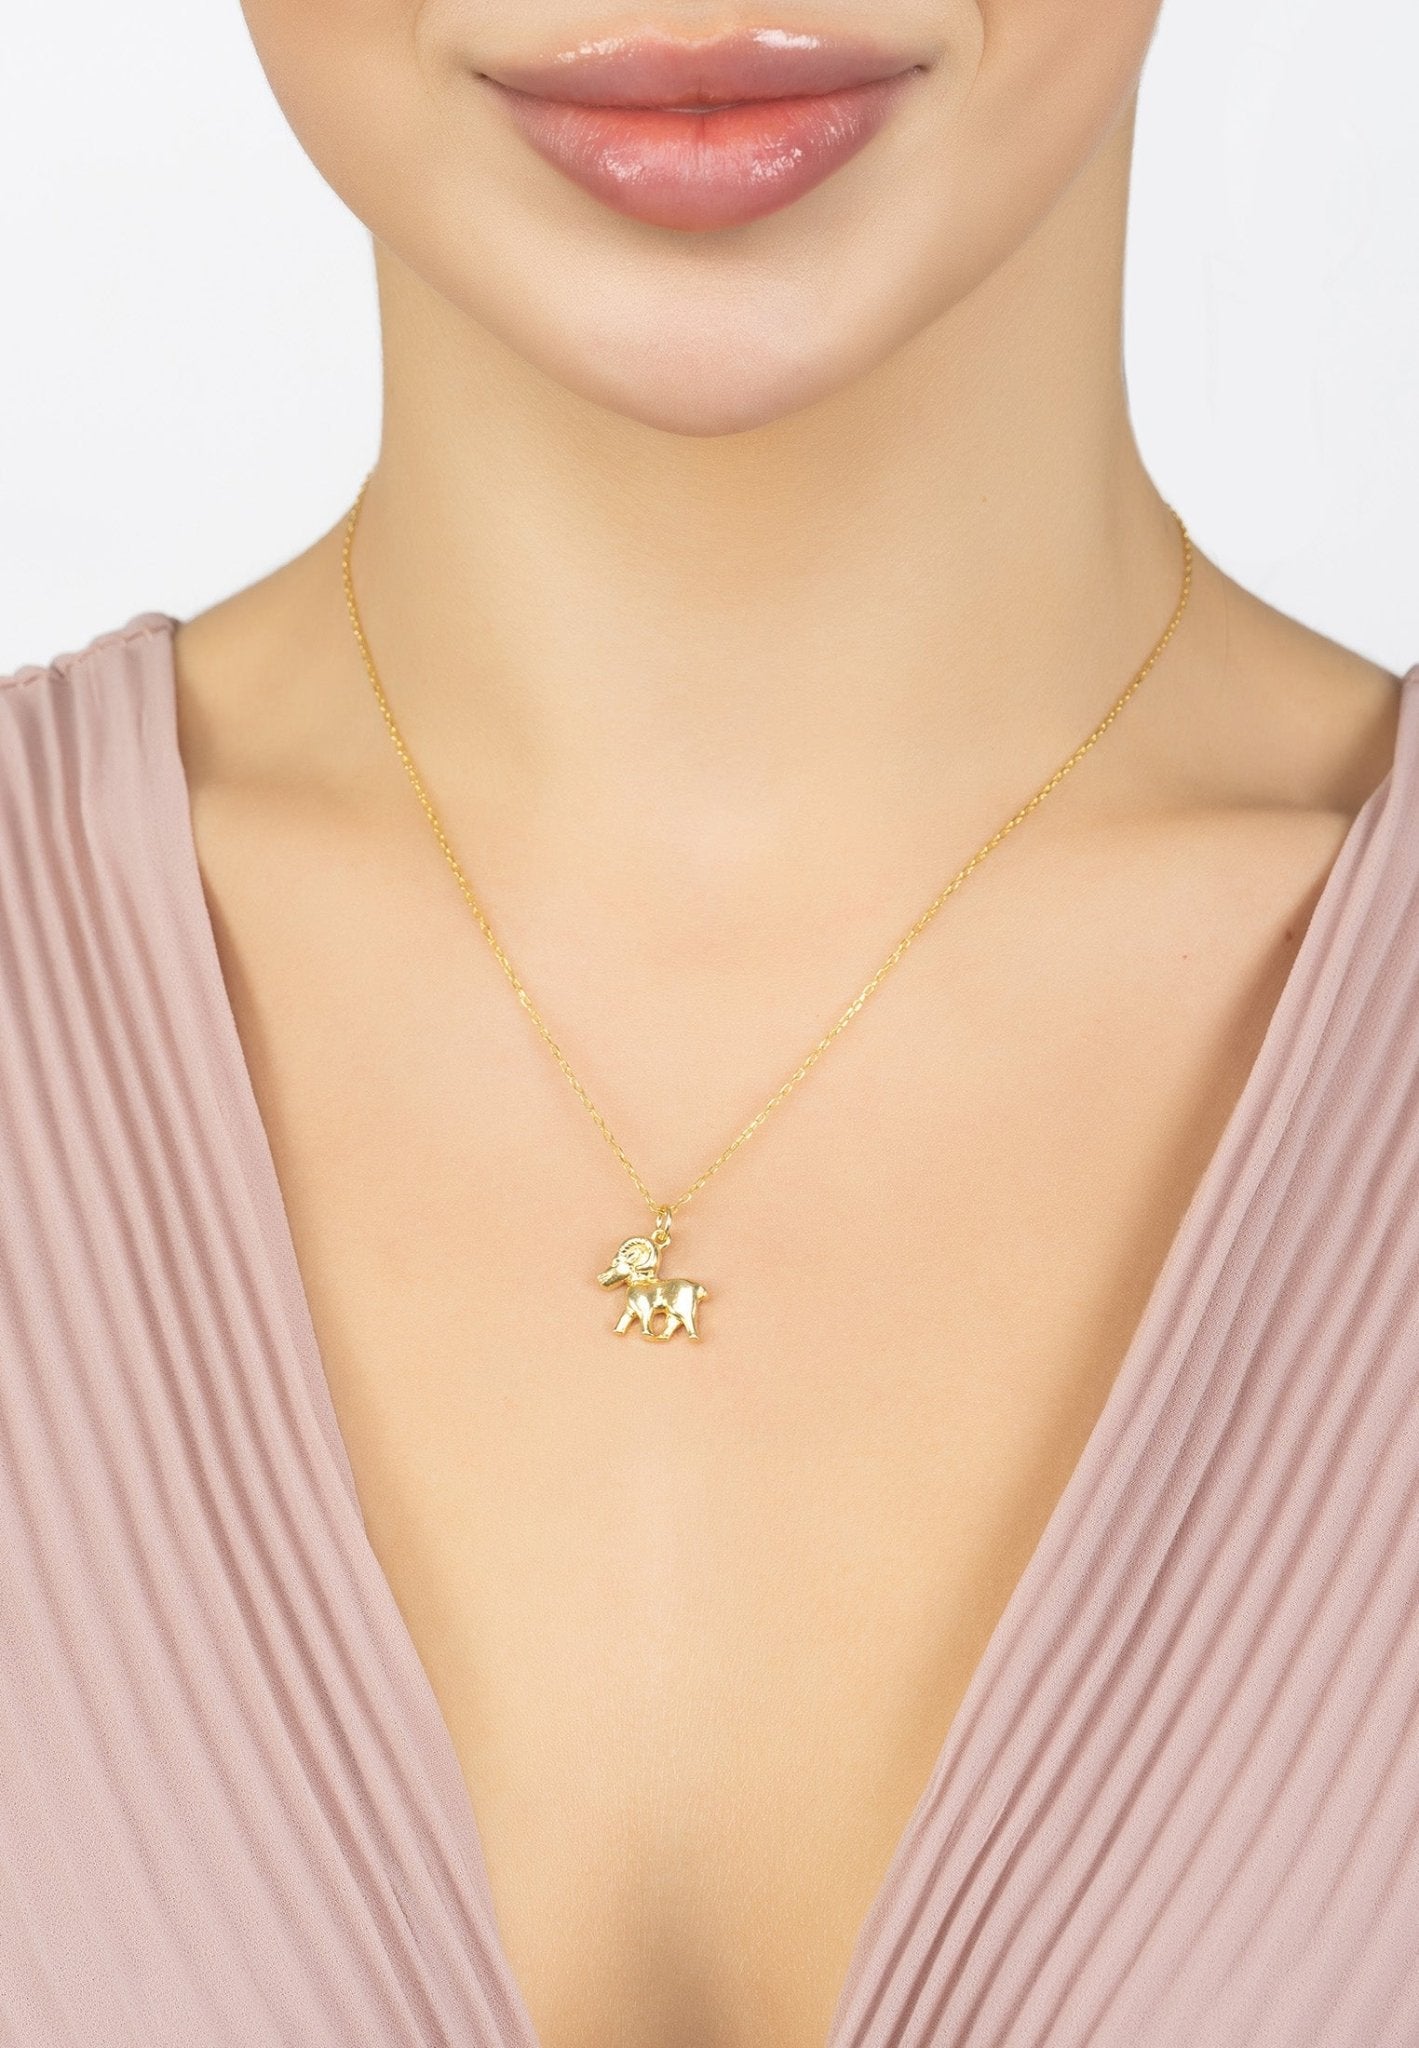 Personalized Necklaces - Zodiac Aries Star Sign Necklace Gold 